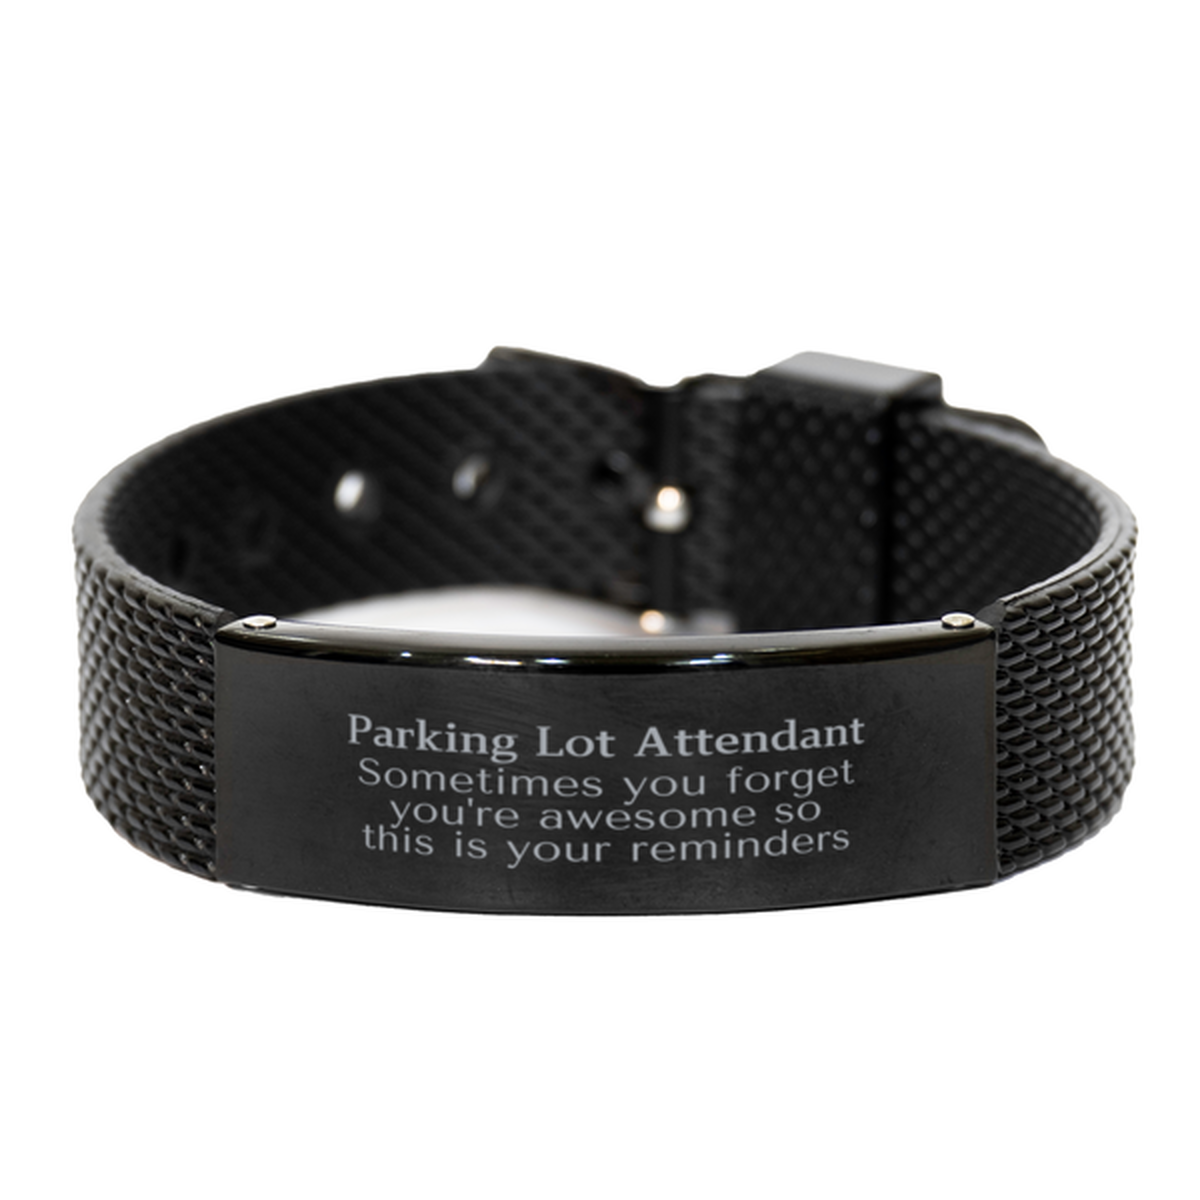 Sentimental Parking Lot Attendant Black Shark Mesh Bracelet, Parking Lot Attendant Sometimes you forget you're awesome so this is your reminders, Graduation Christmas Birthday Gifts for Parking Lot Attendant, Men, Women, Coworkers